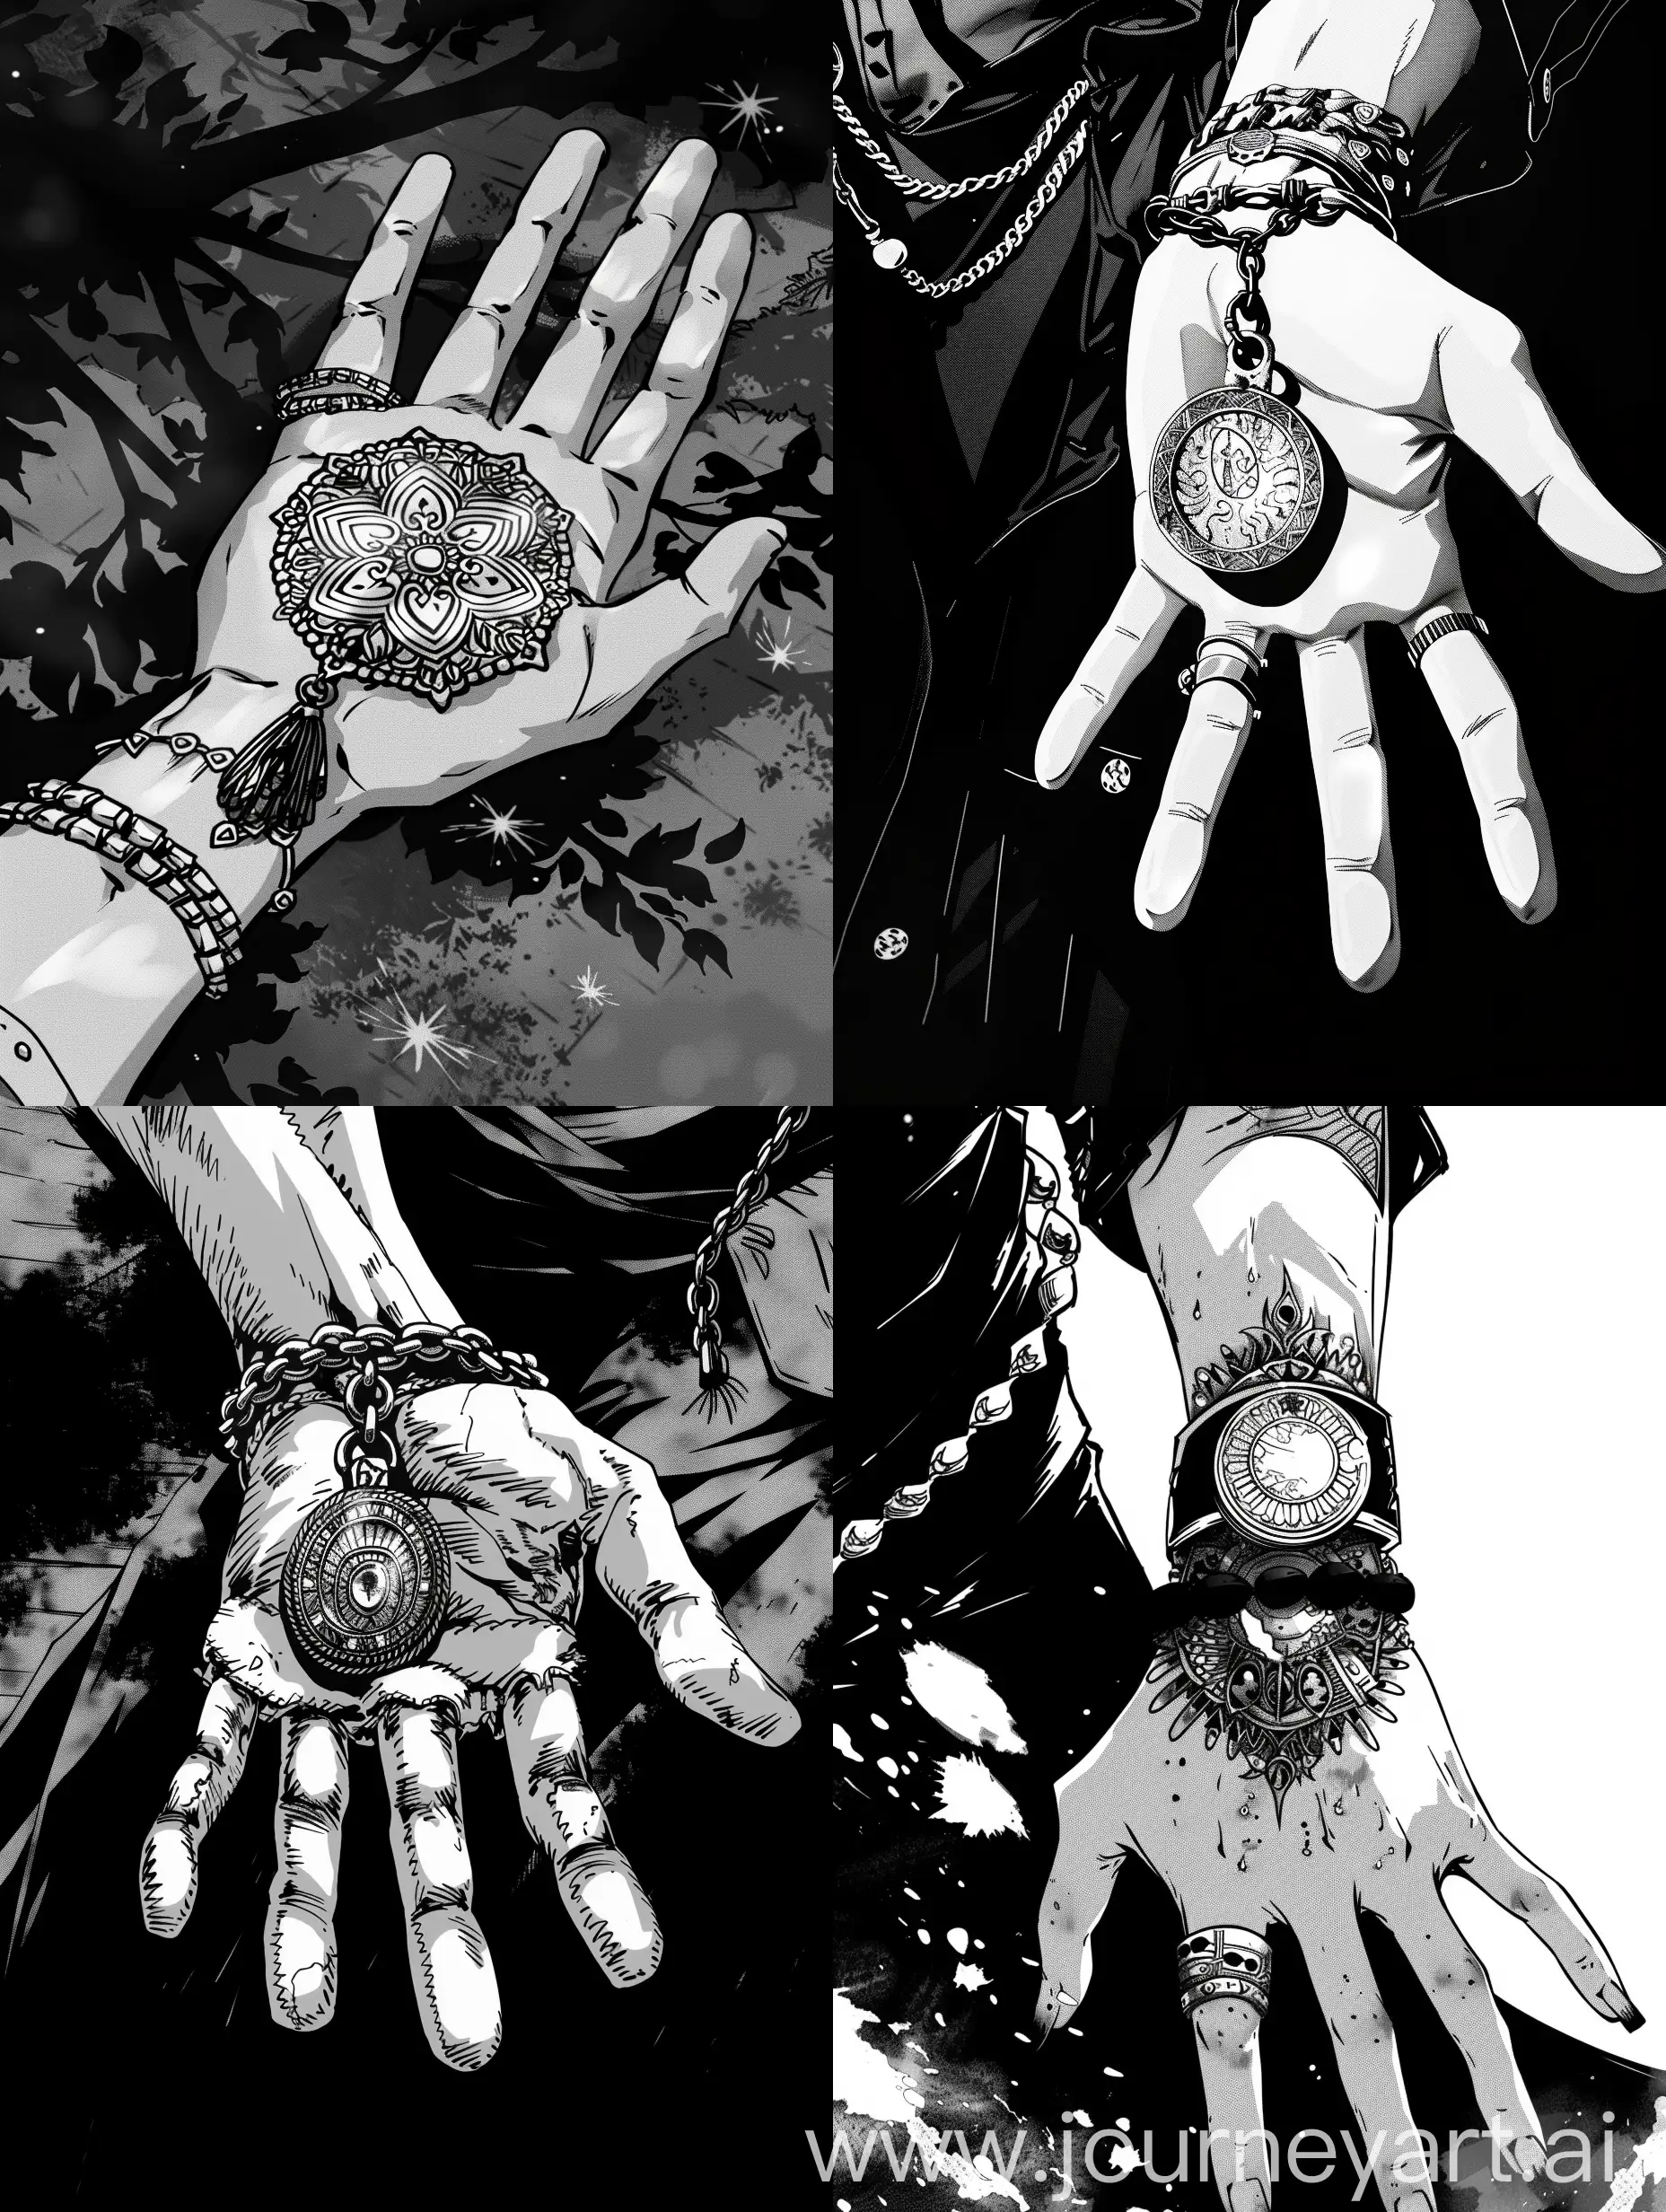 the amulet in the hand, manga style.